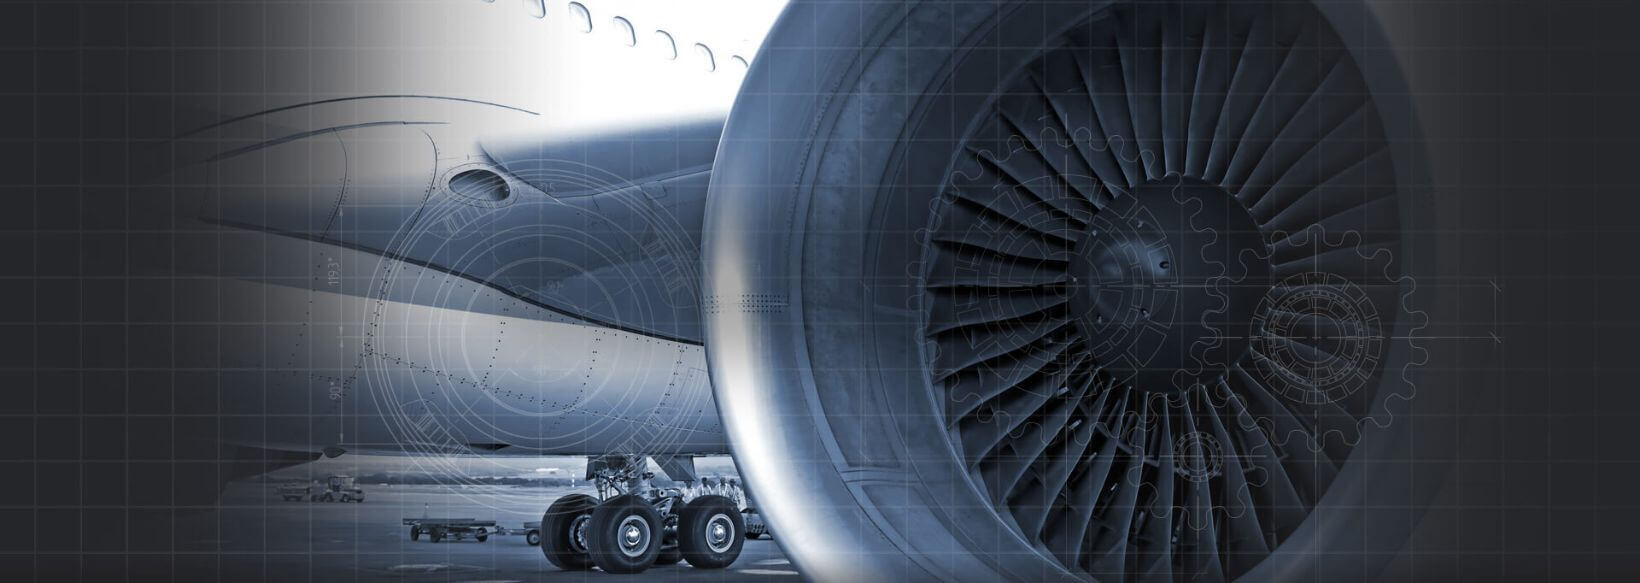 Specialty Metals for the Aerospace Industry